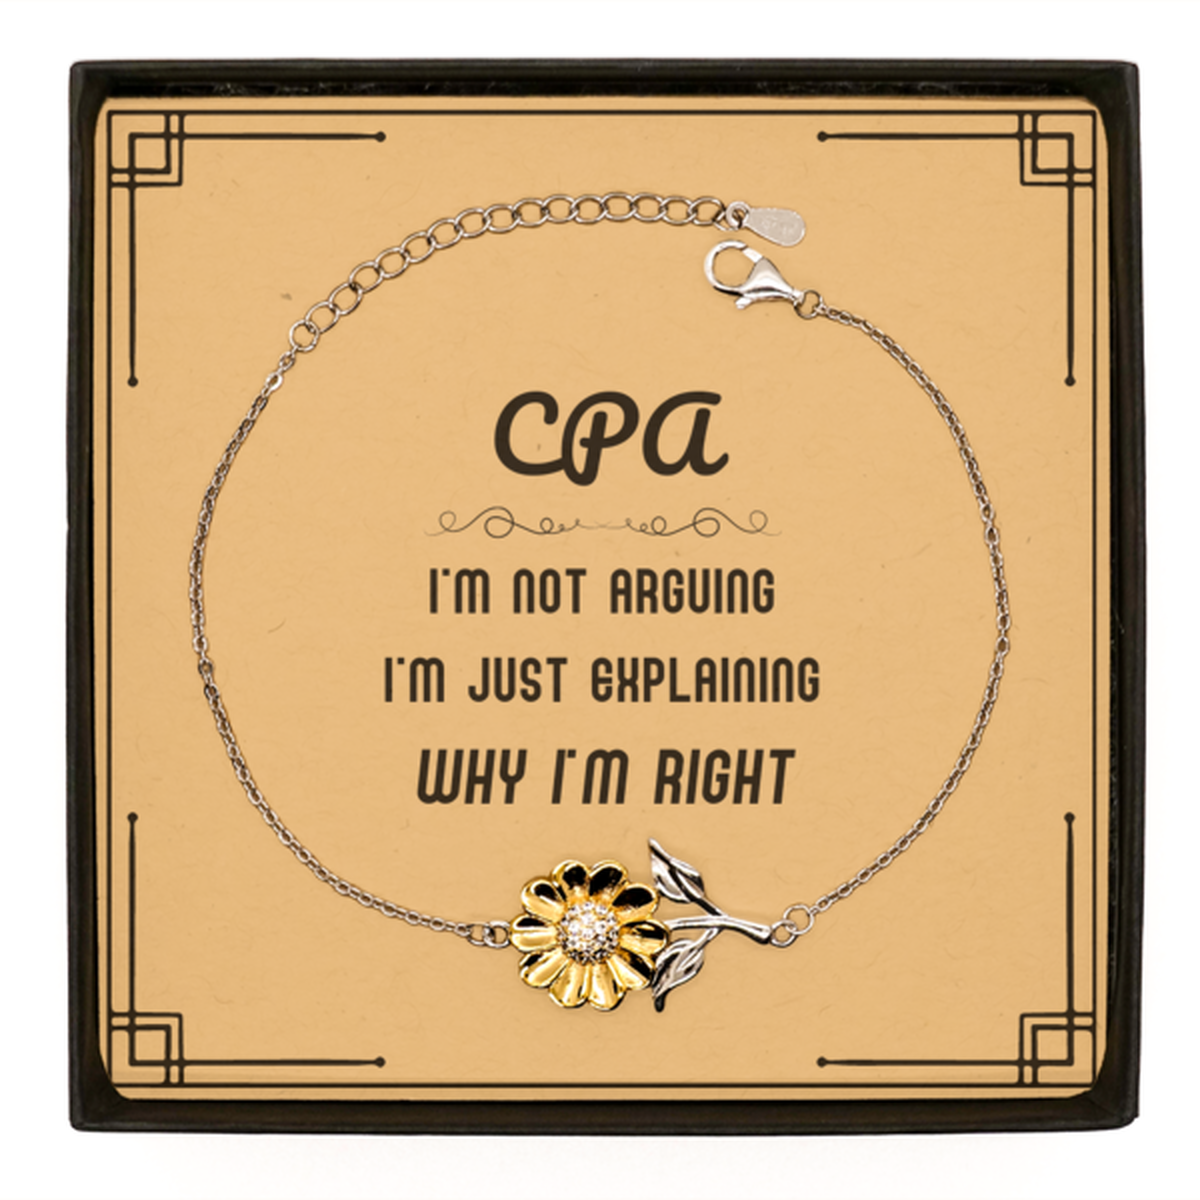 CPA I'm not Arguing. I'm Just Explaining Why I'm RIGHT Sunflower Bracelet, Funny Saying Quote CPA Gifts For CPA Message Card Graduation Birthday Christmas Gifts for Men Women Coworker